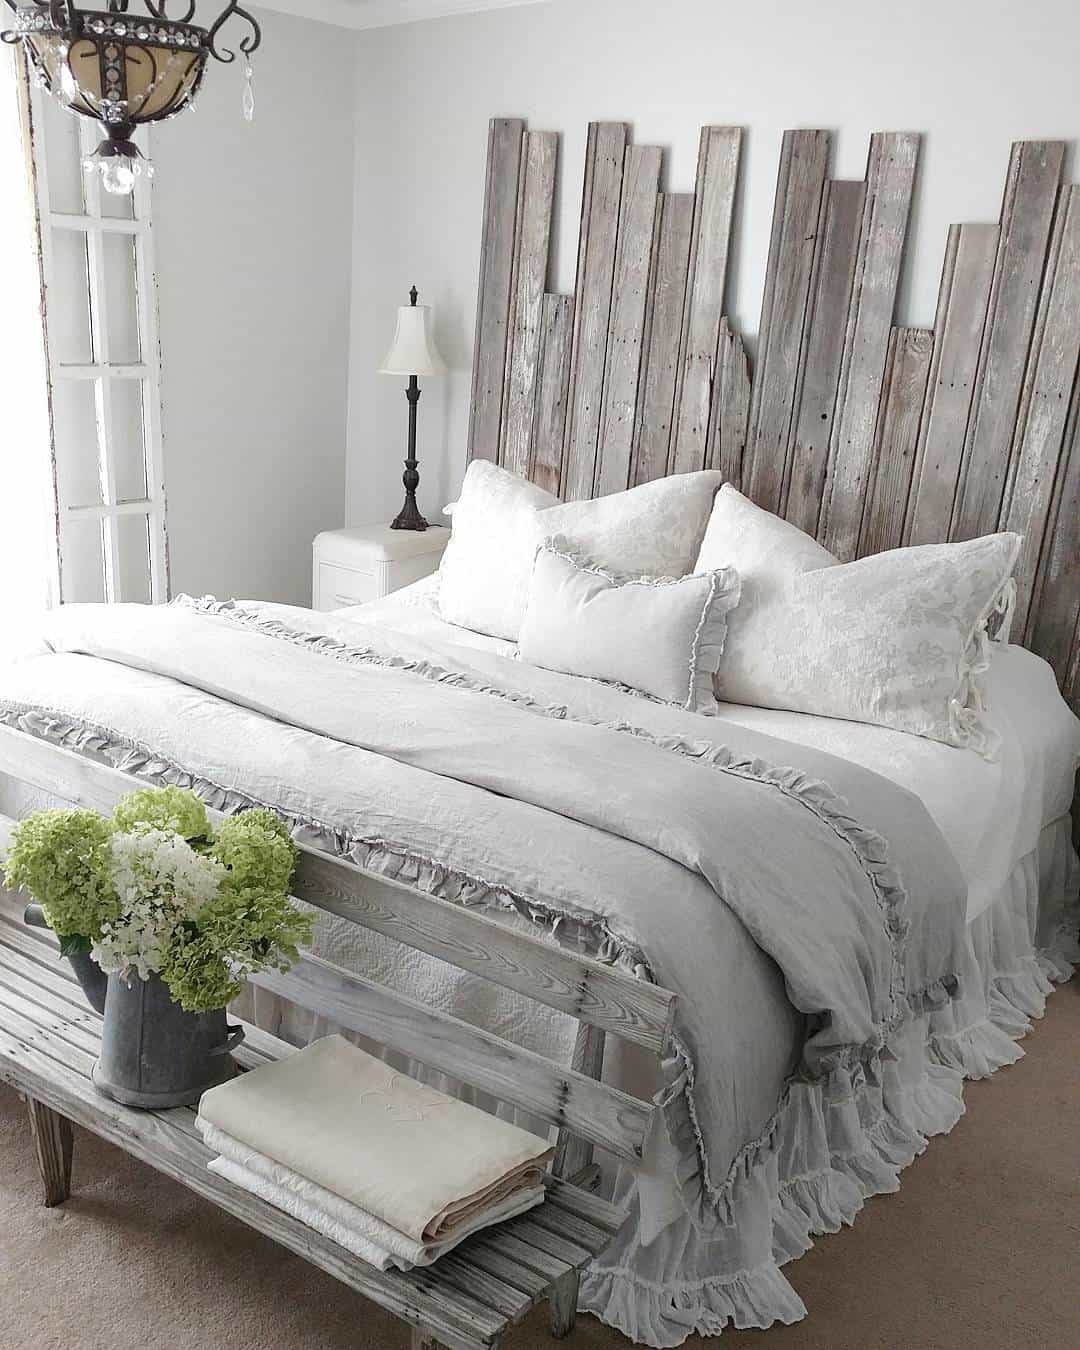 Guest Bedroom Color Palettes That Will Make Your Guests Feel At Home